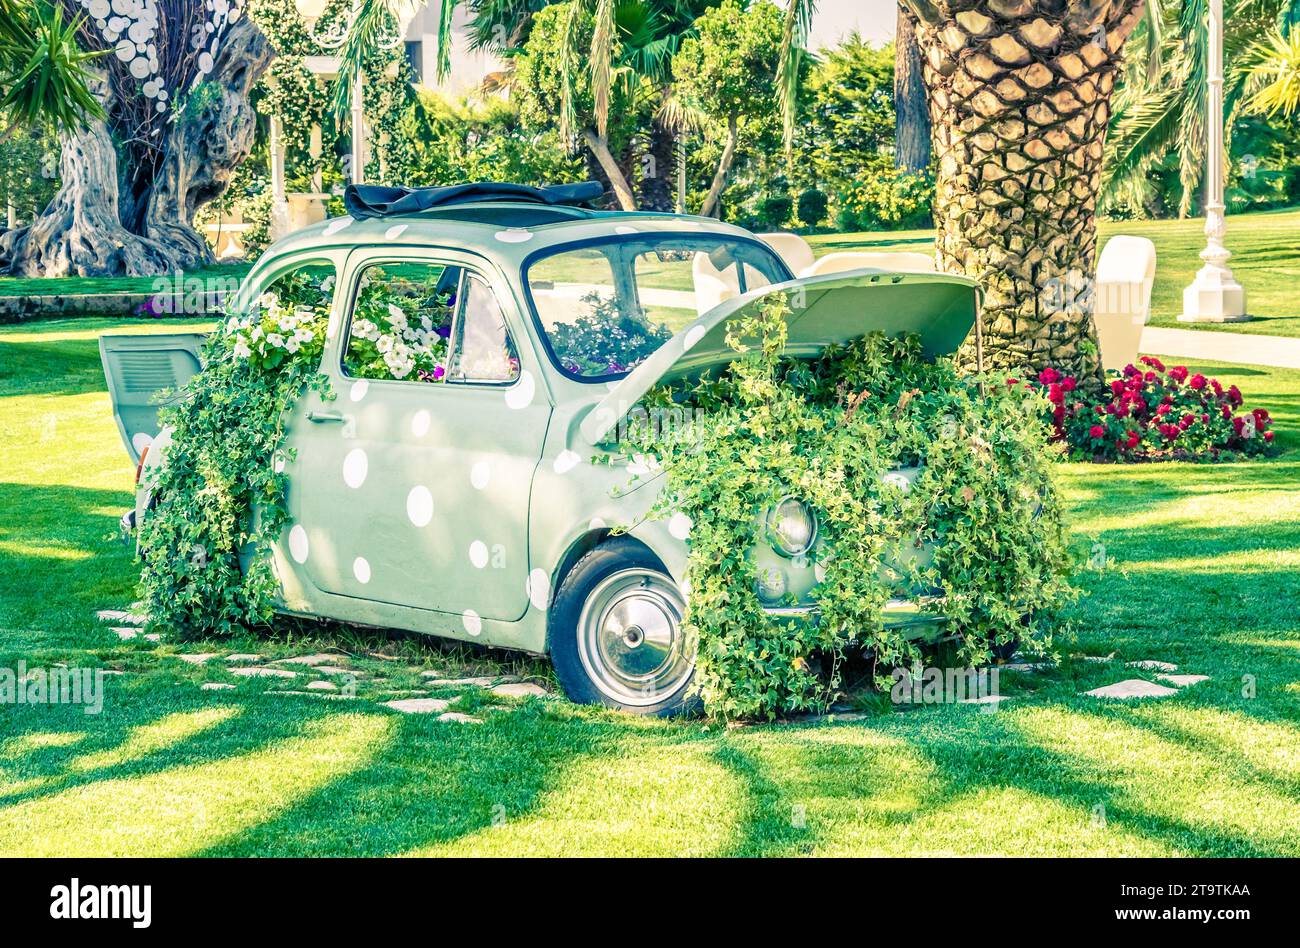 old little wedding car on green garden near flowers and leaves, vintage style Stock Photo